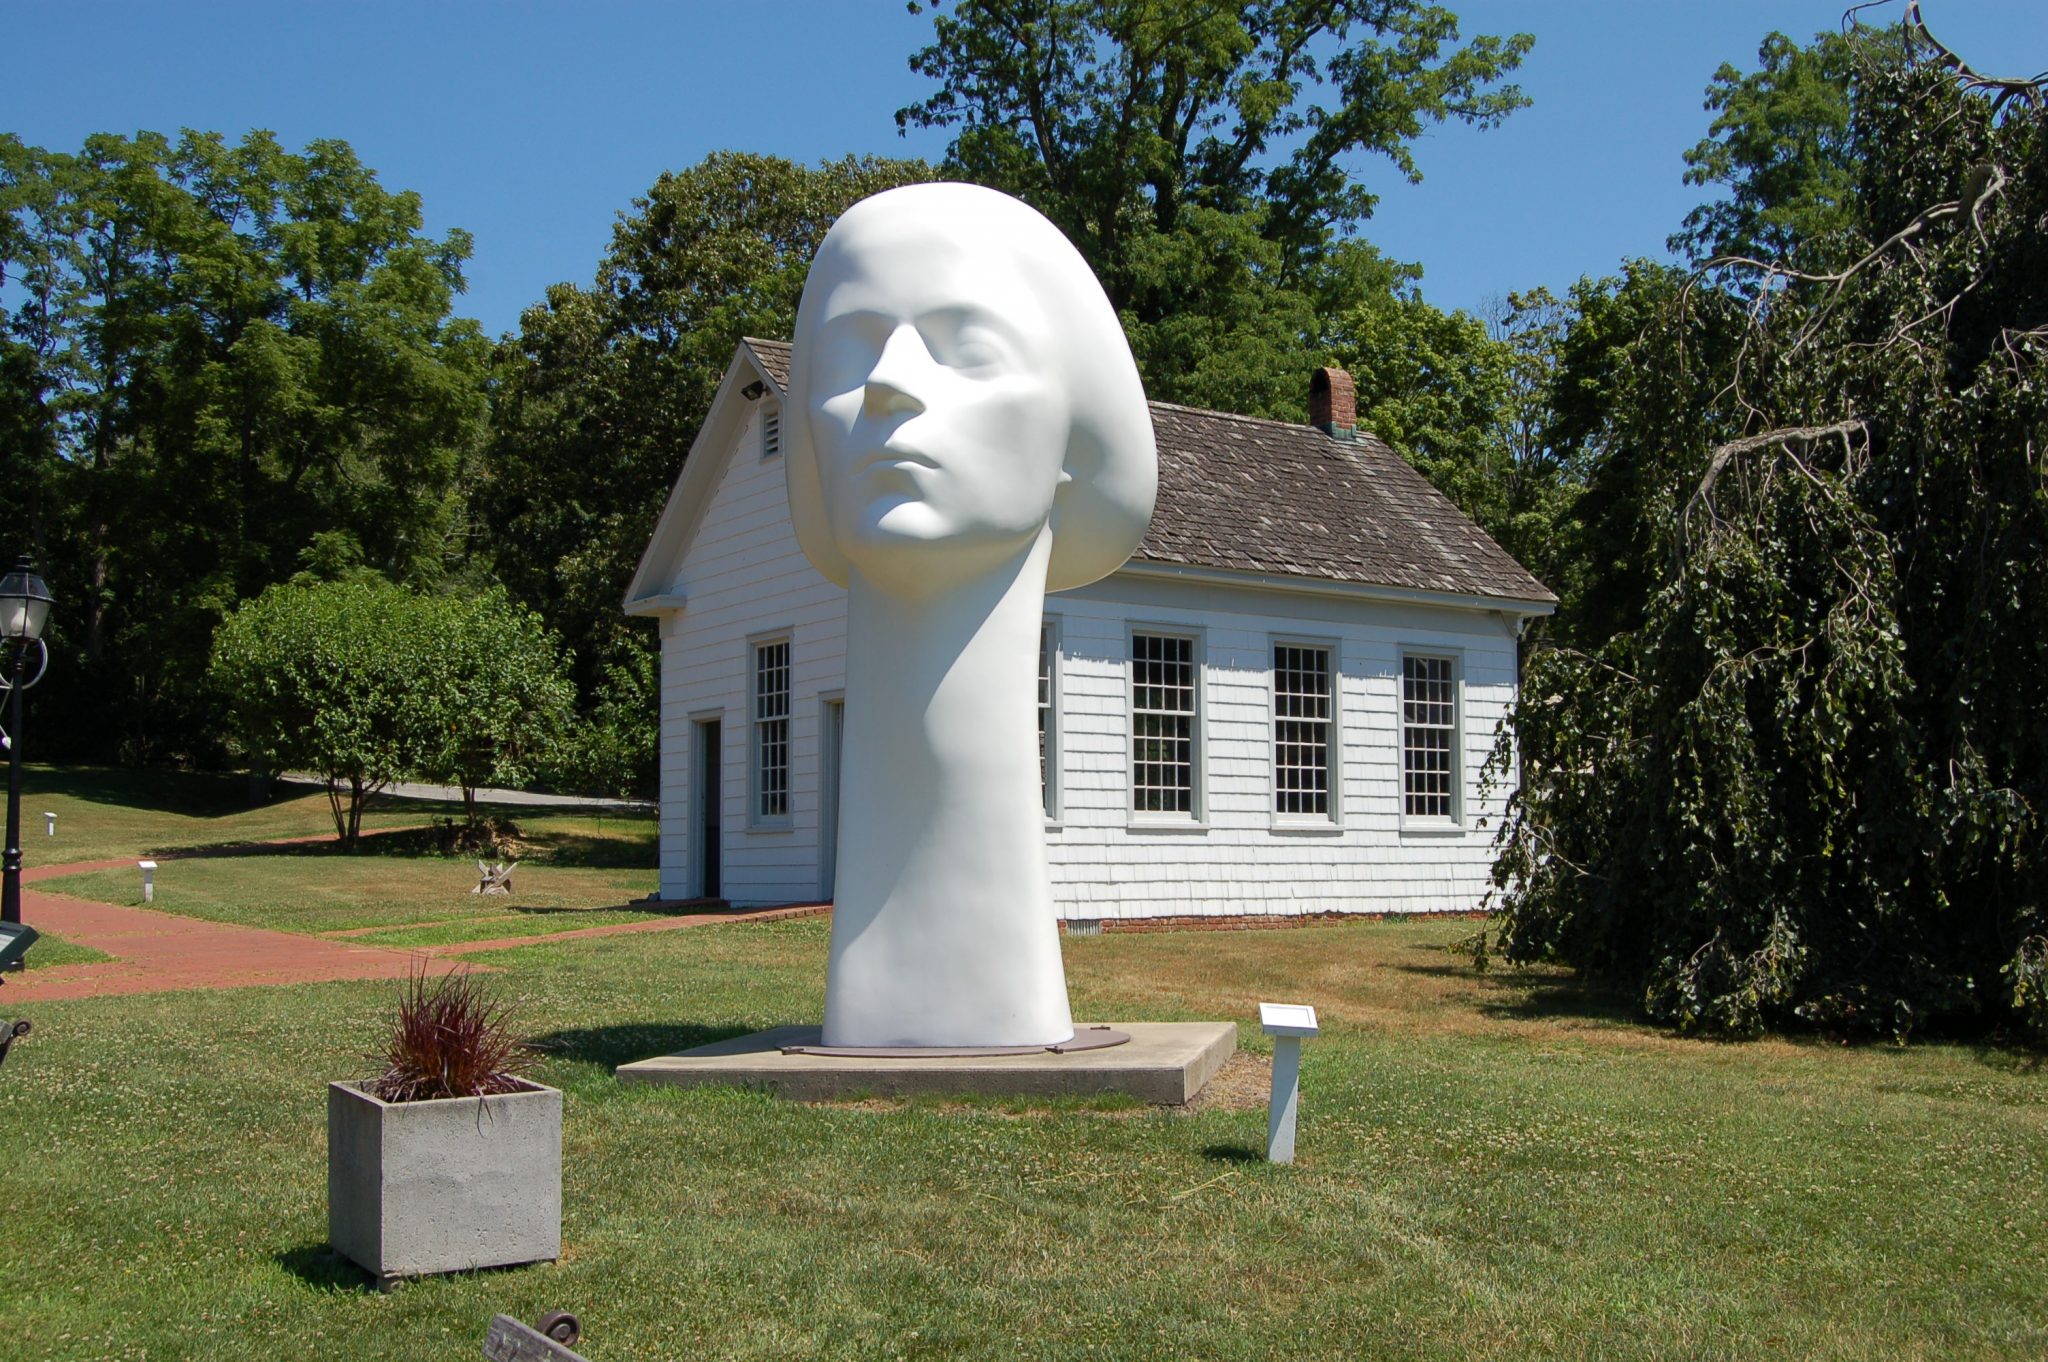 The Long Island Museum Location